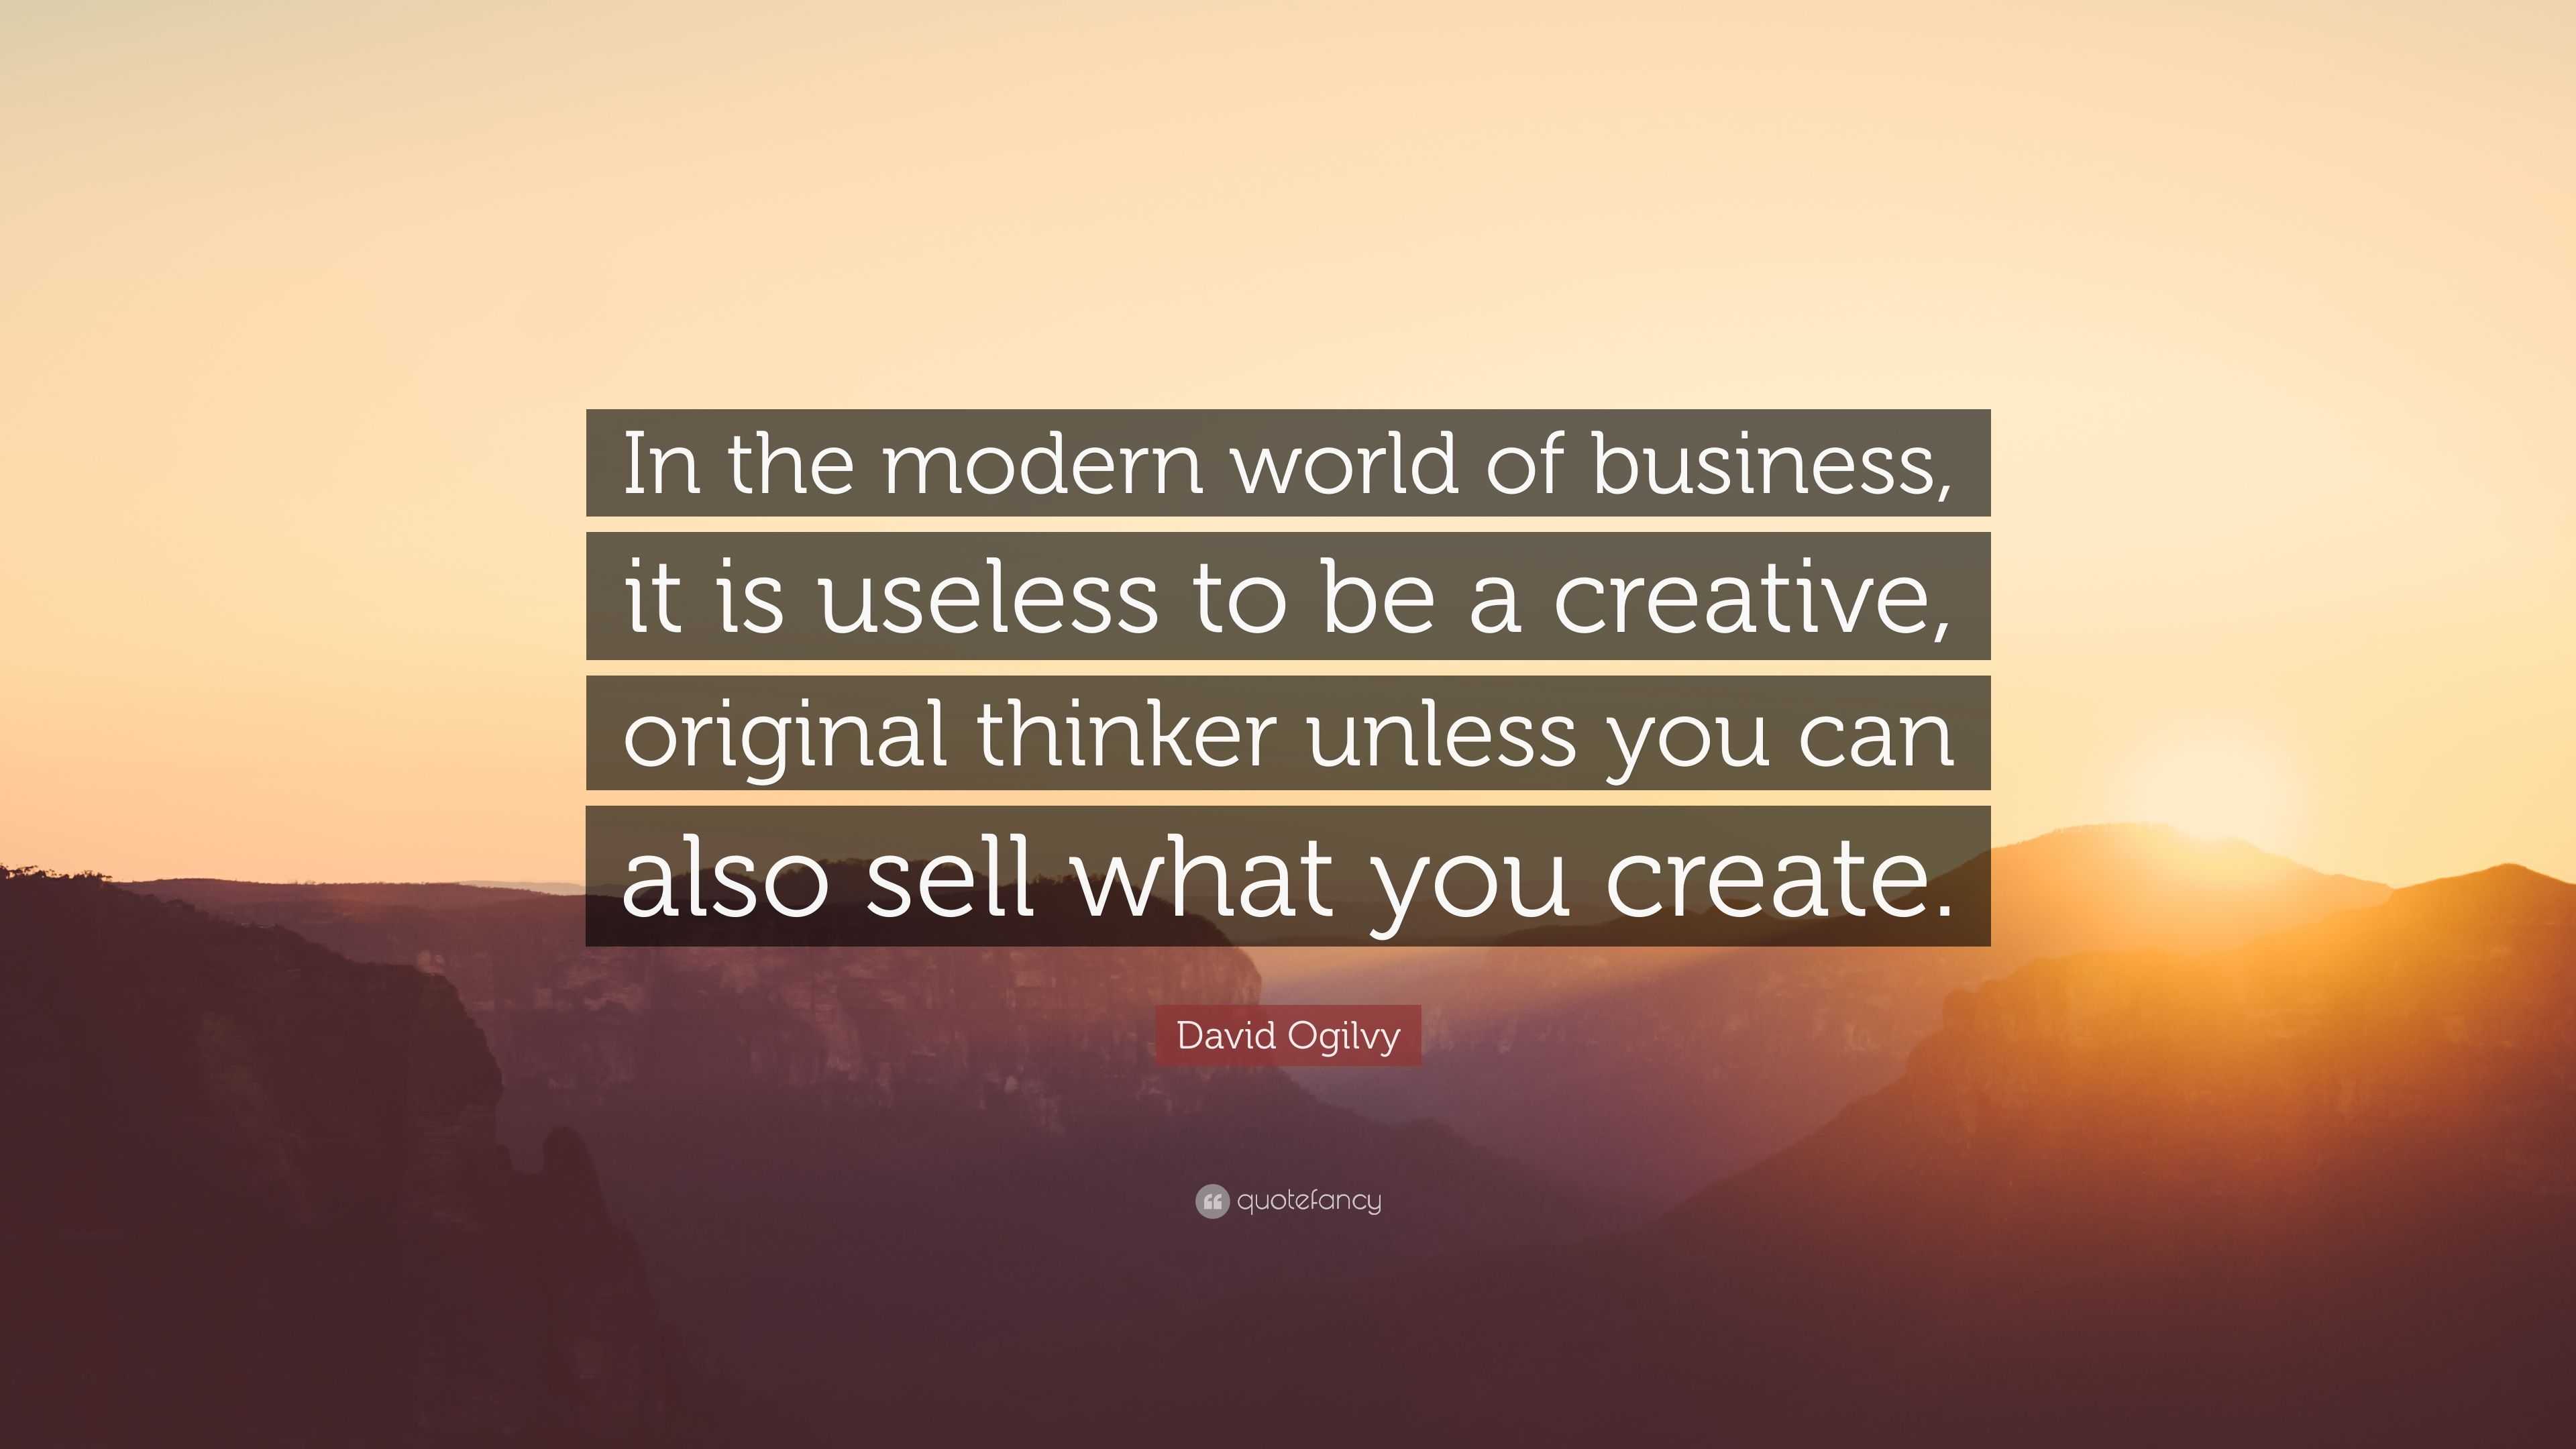 David Ogilvy Quote: "In the modern world of business, it ...